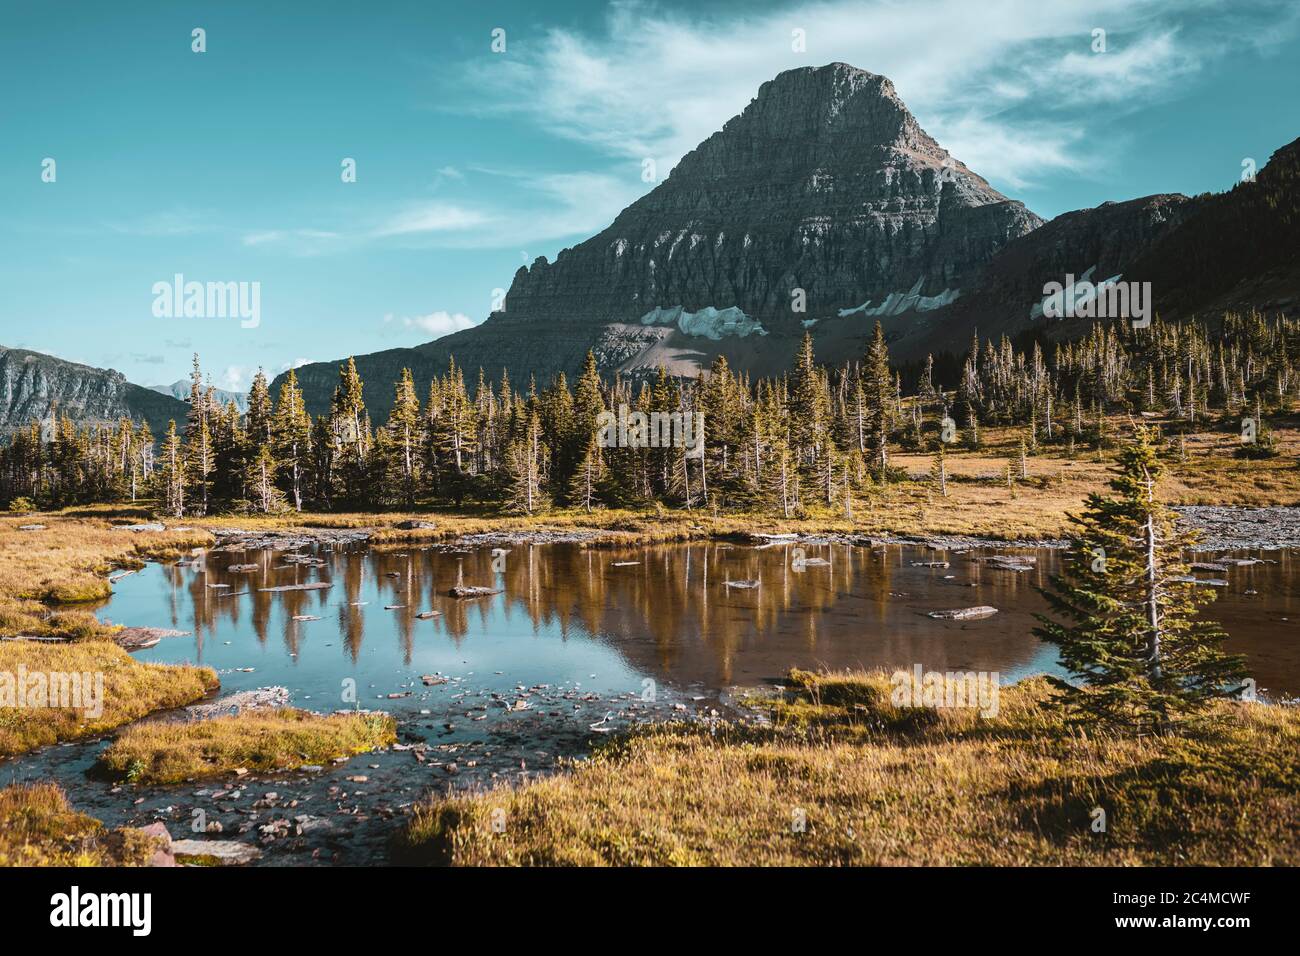 Hiking at the famous logan pass, hidden lake overlook, explore the nature and look for mountain goats Stock Photo